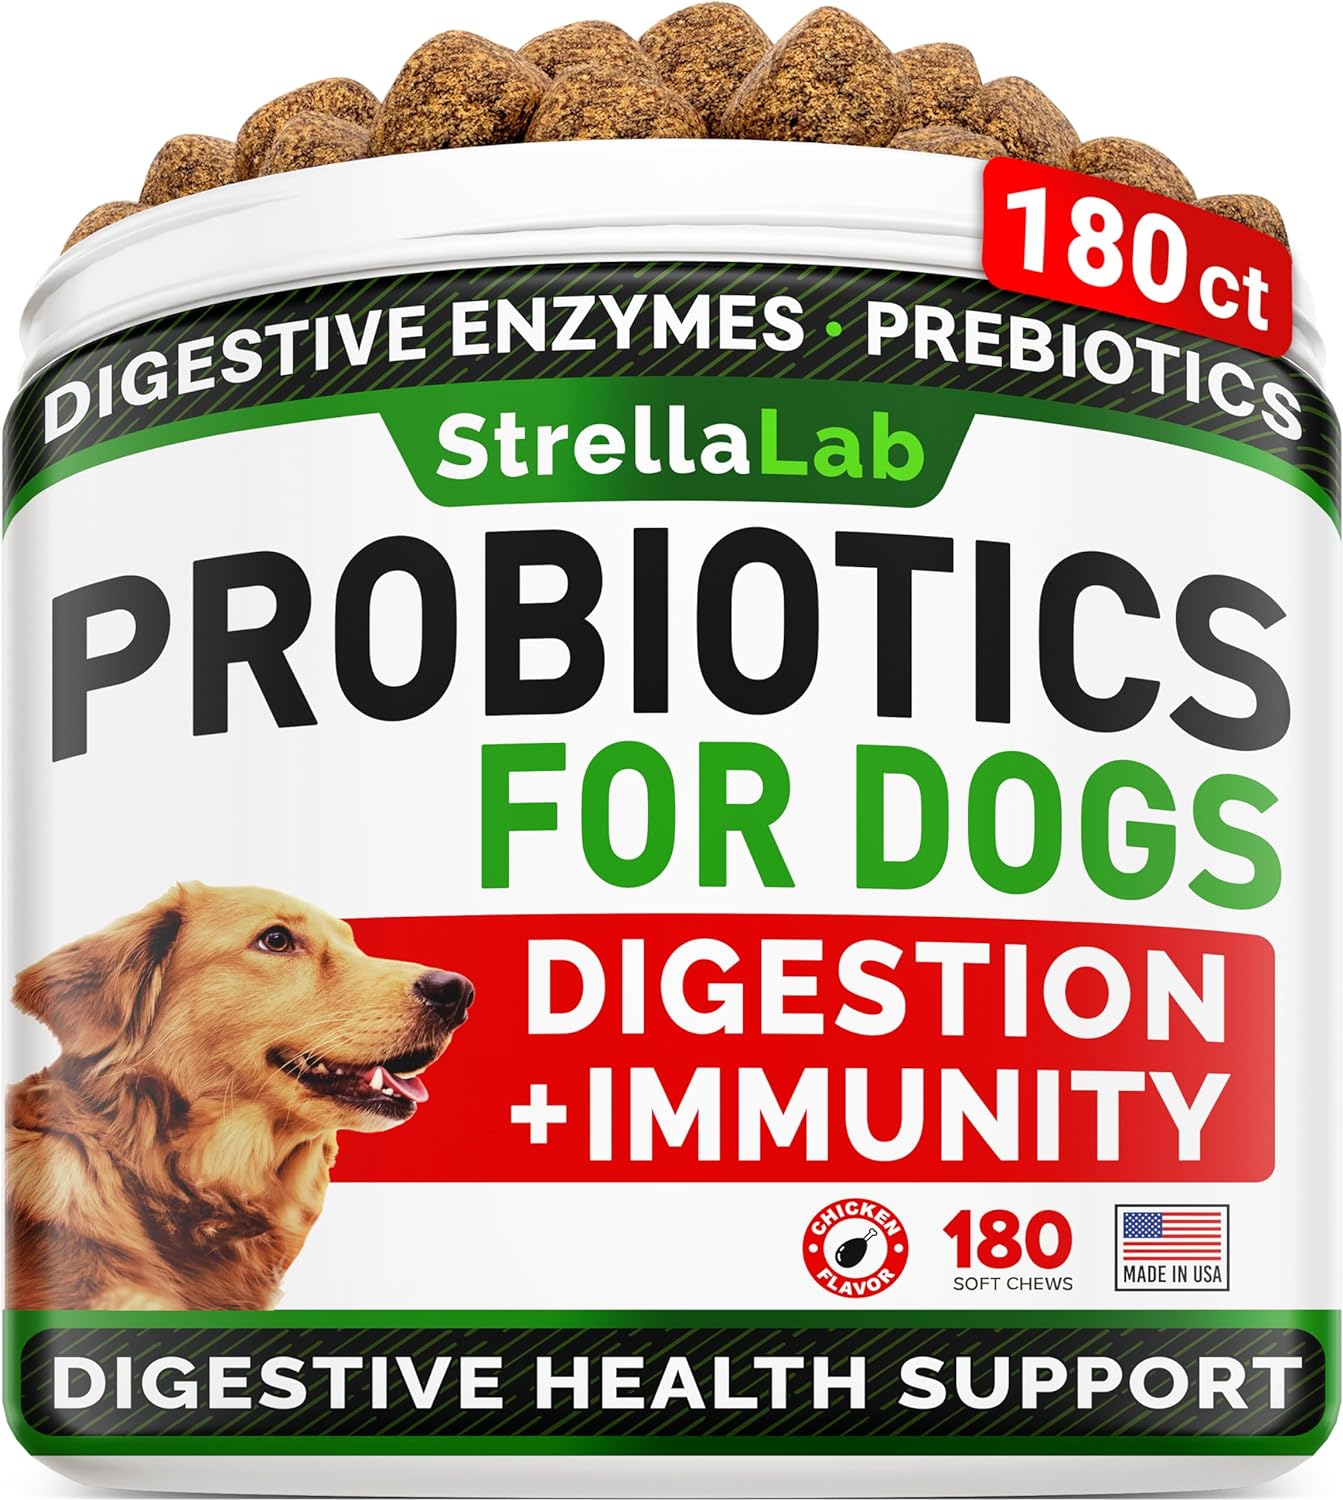 StrellaLab Dog Probiotics Treats for Picky Eaters (180ct) - Digestive Enzymes + Prebiotics - Chewable Fiber Supplement - Allergy, Diarrhea, Gas, Constipation, Upset Stomach Relief - Digestion&Immunity